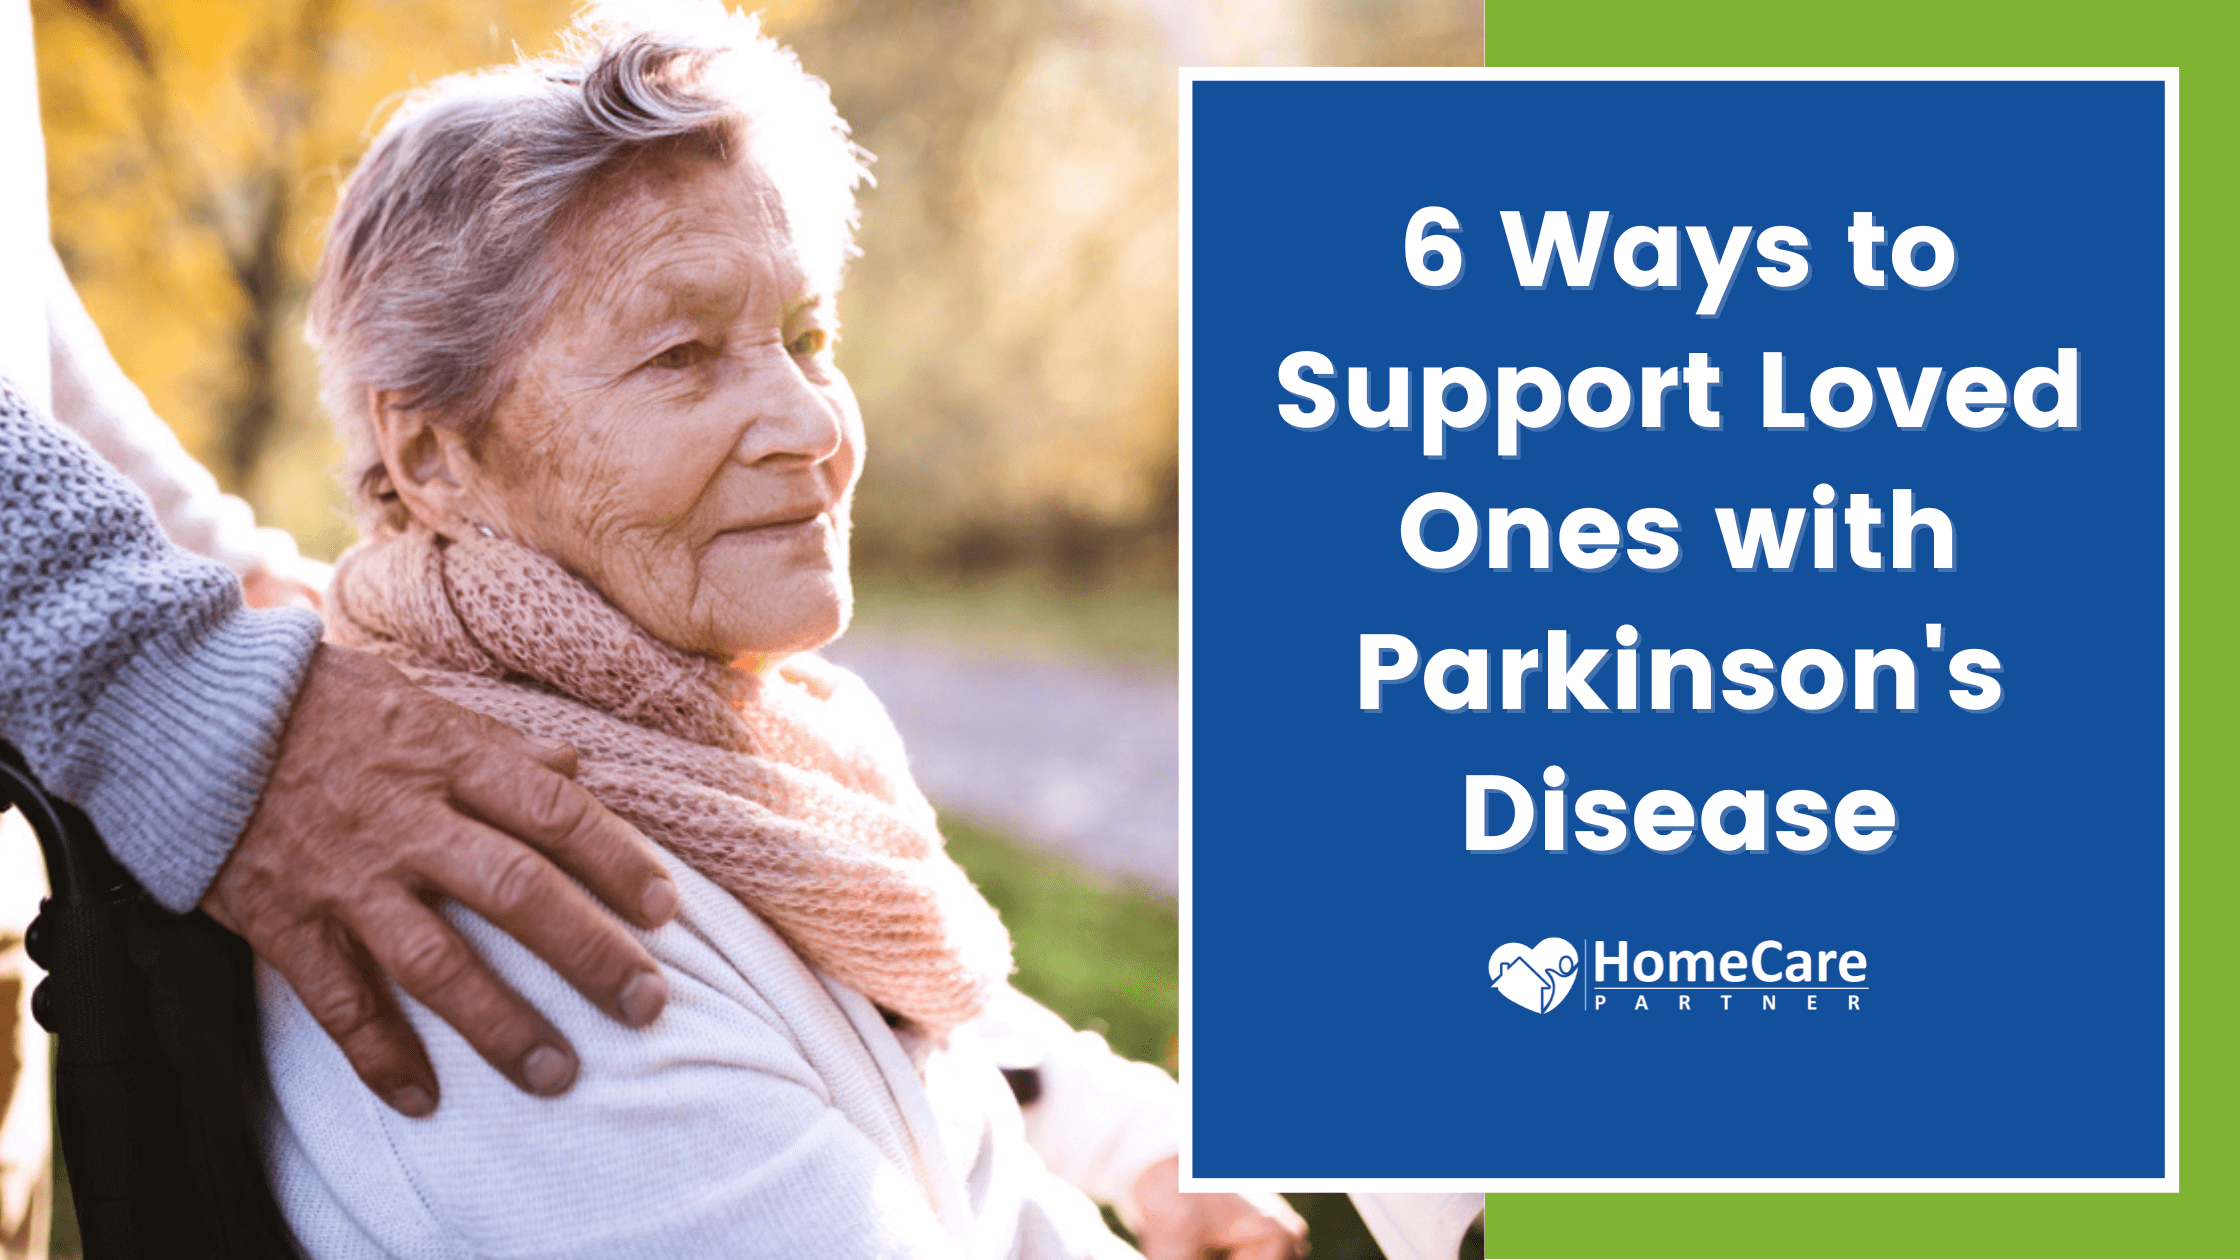 6 Ways to Support Loved Ones with Parkinson's Disease